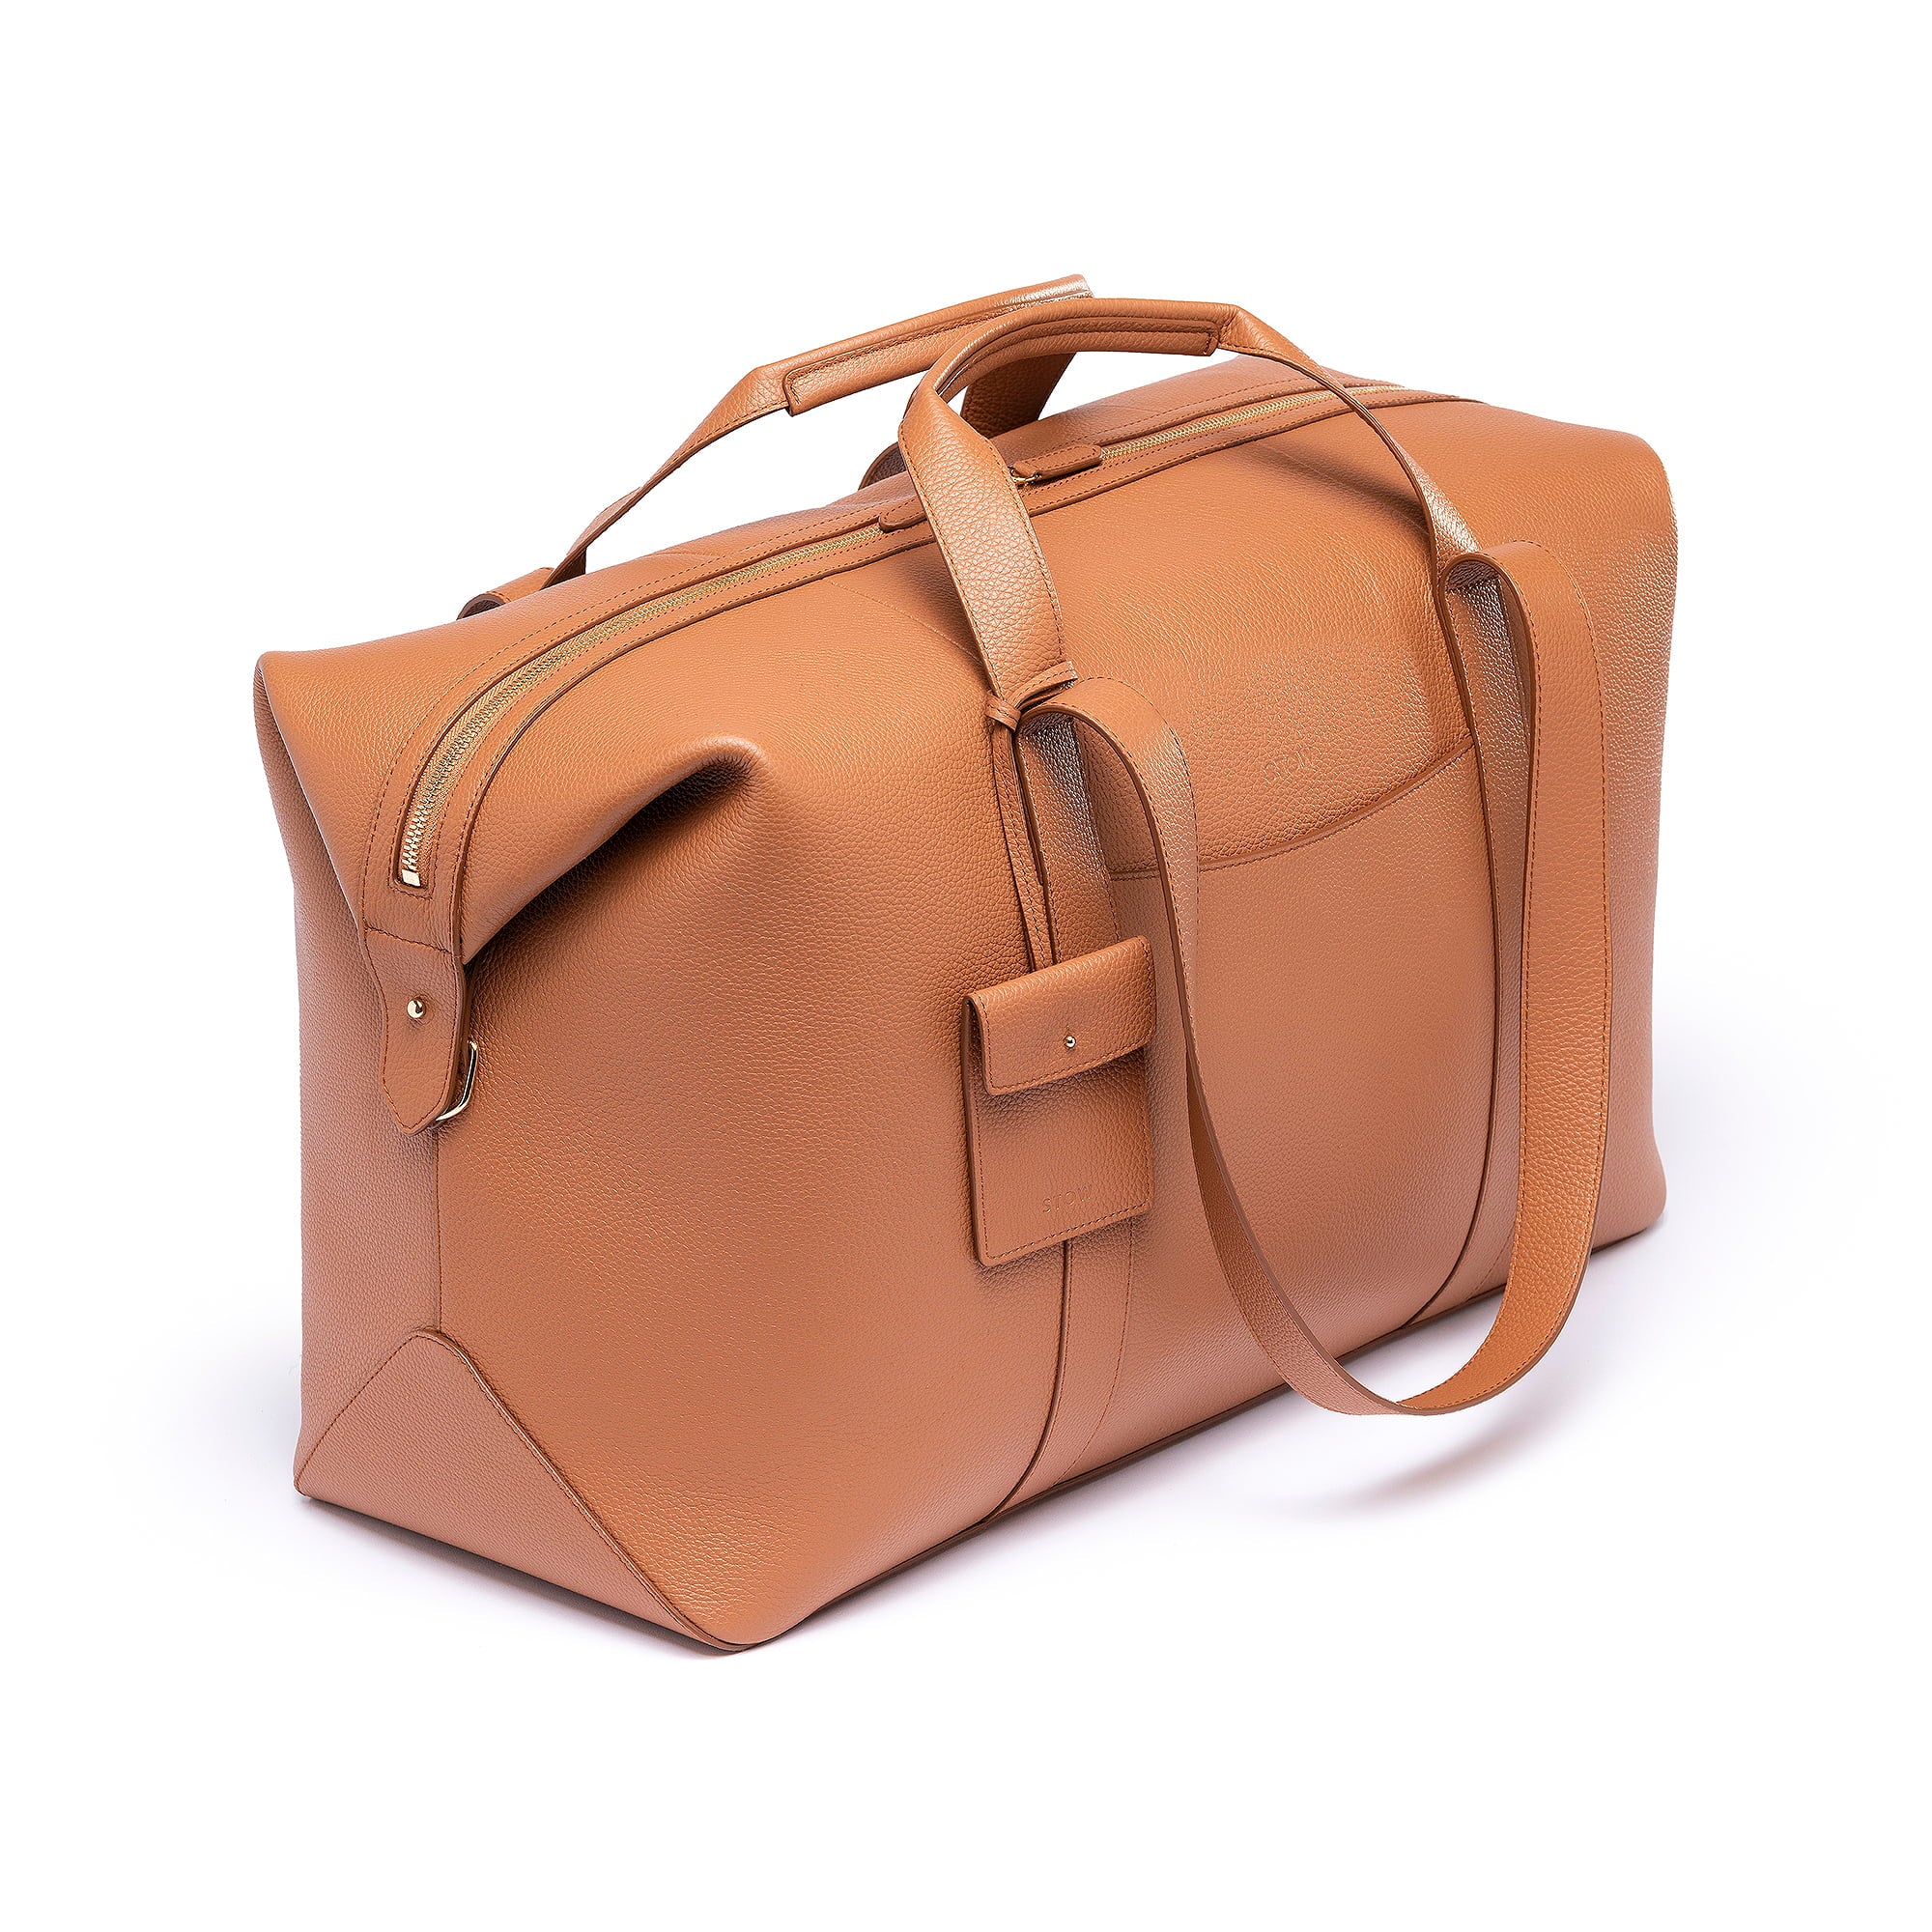 STOW Leather Multi Tag in Earth Tan pebbled leather shown hanging on Earth Tan Leather Weekend Bag by STOW.